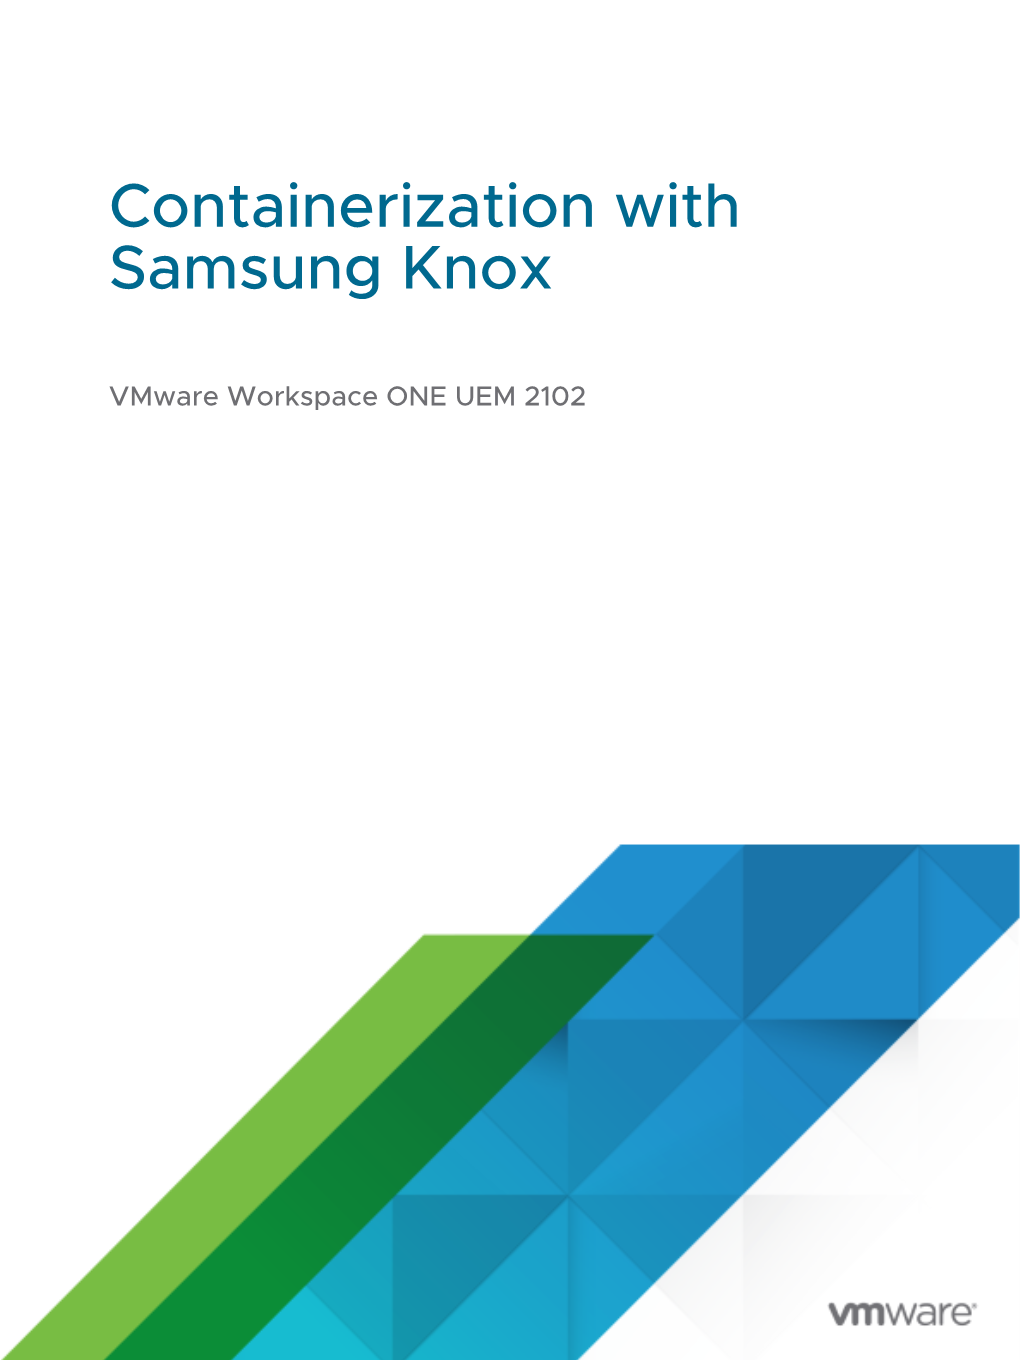 Containerization with Samsung Knox